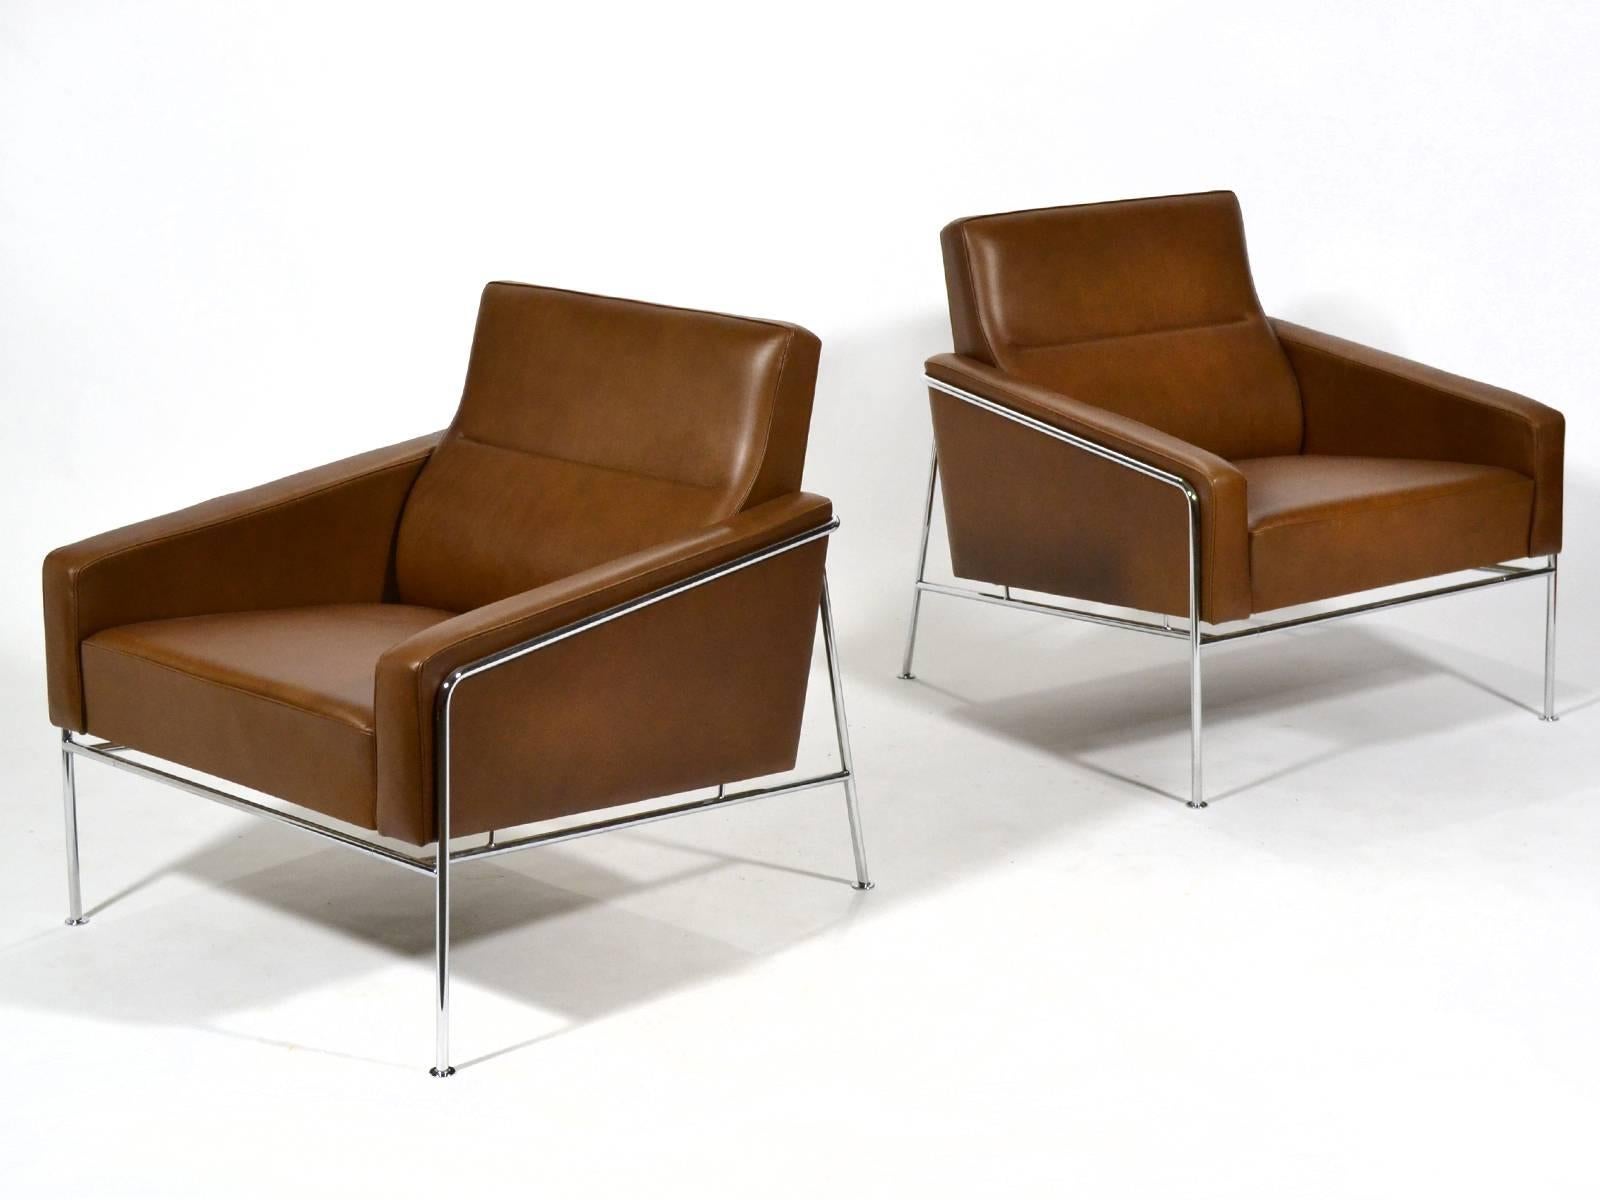 Pair of Arne Jacobsen Series 3300 Lounge Chairs by Fritz Hansen 2